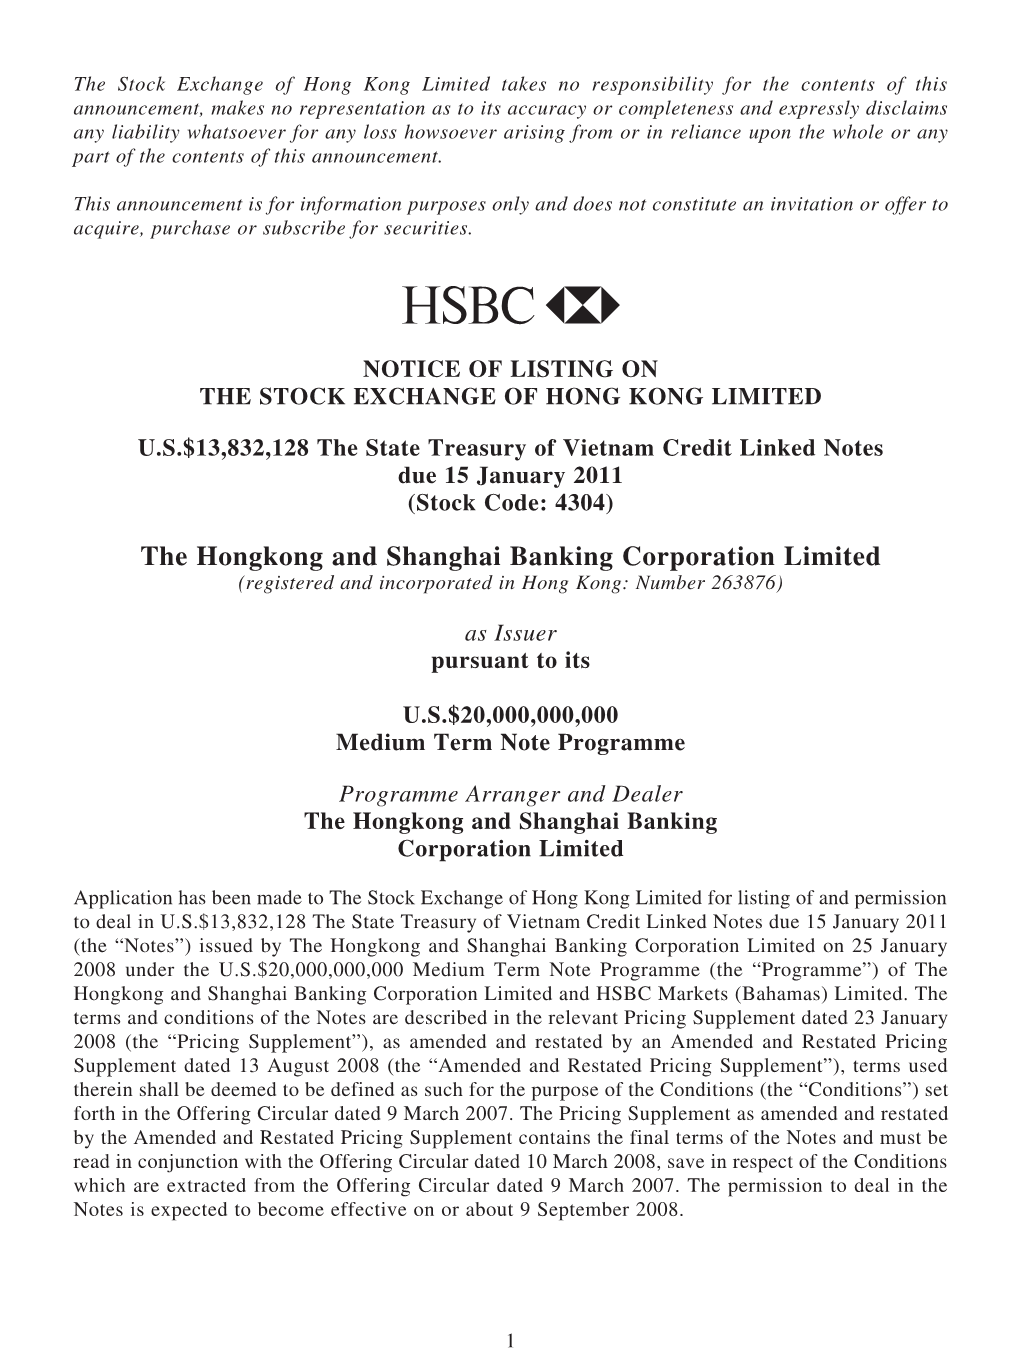 The Hongkong and Shanghai Banking Corporation Limited (Registered and Incorporated in Hong Kong: Number 263876)